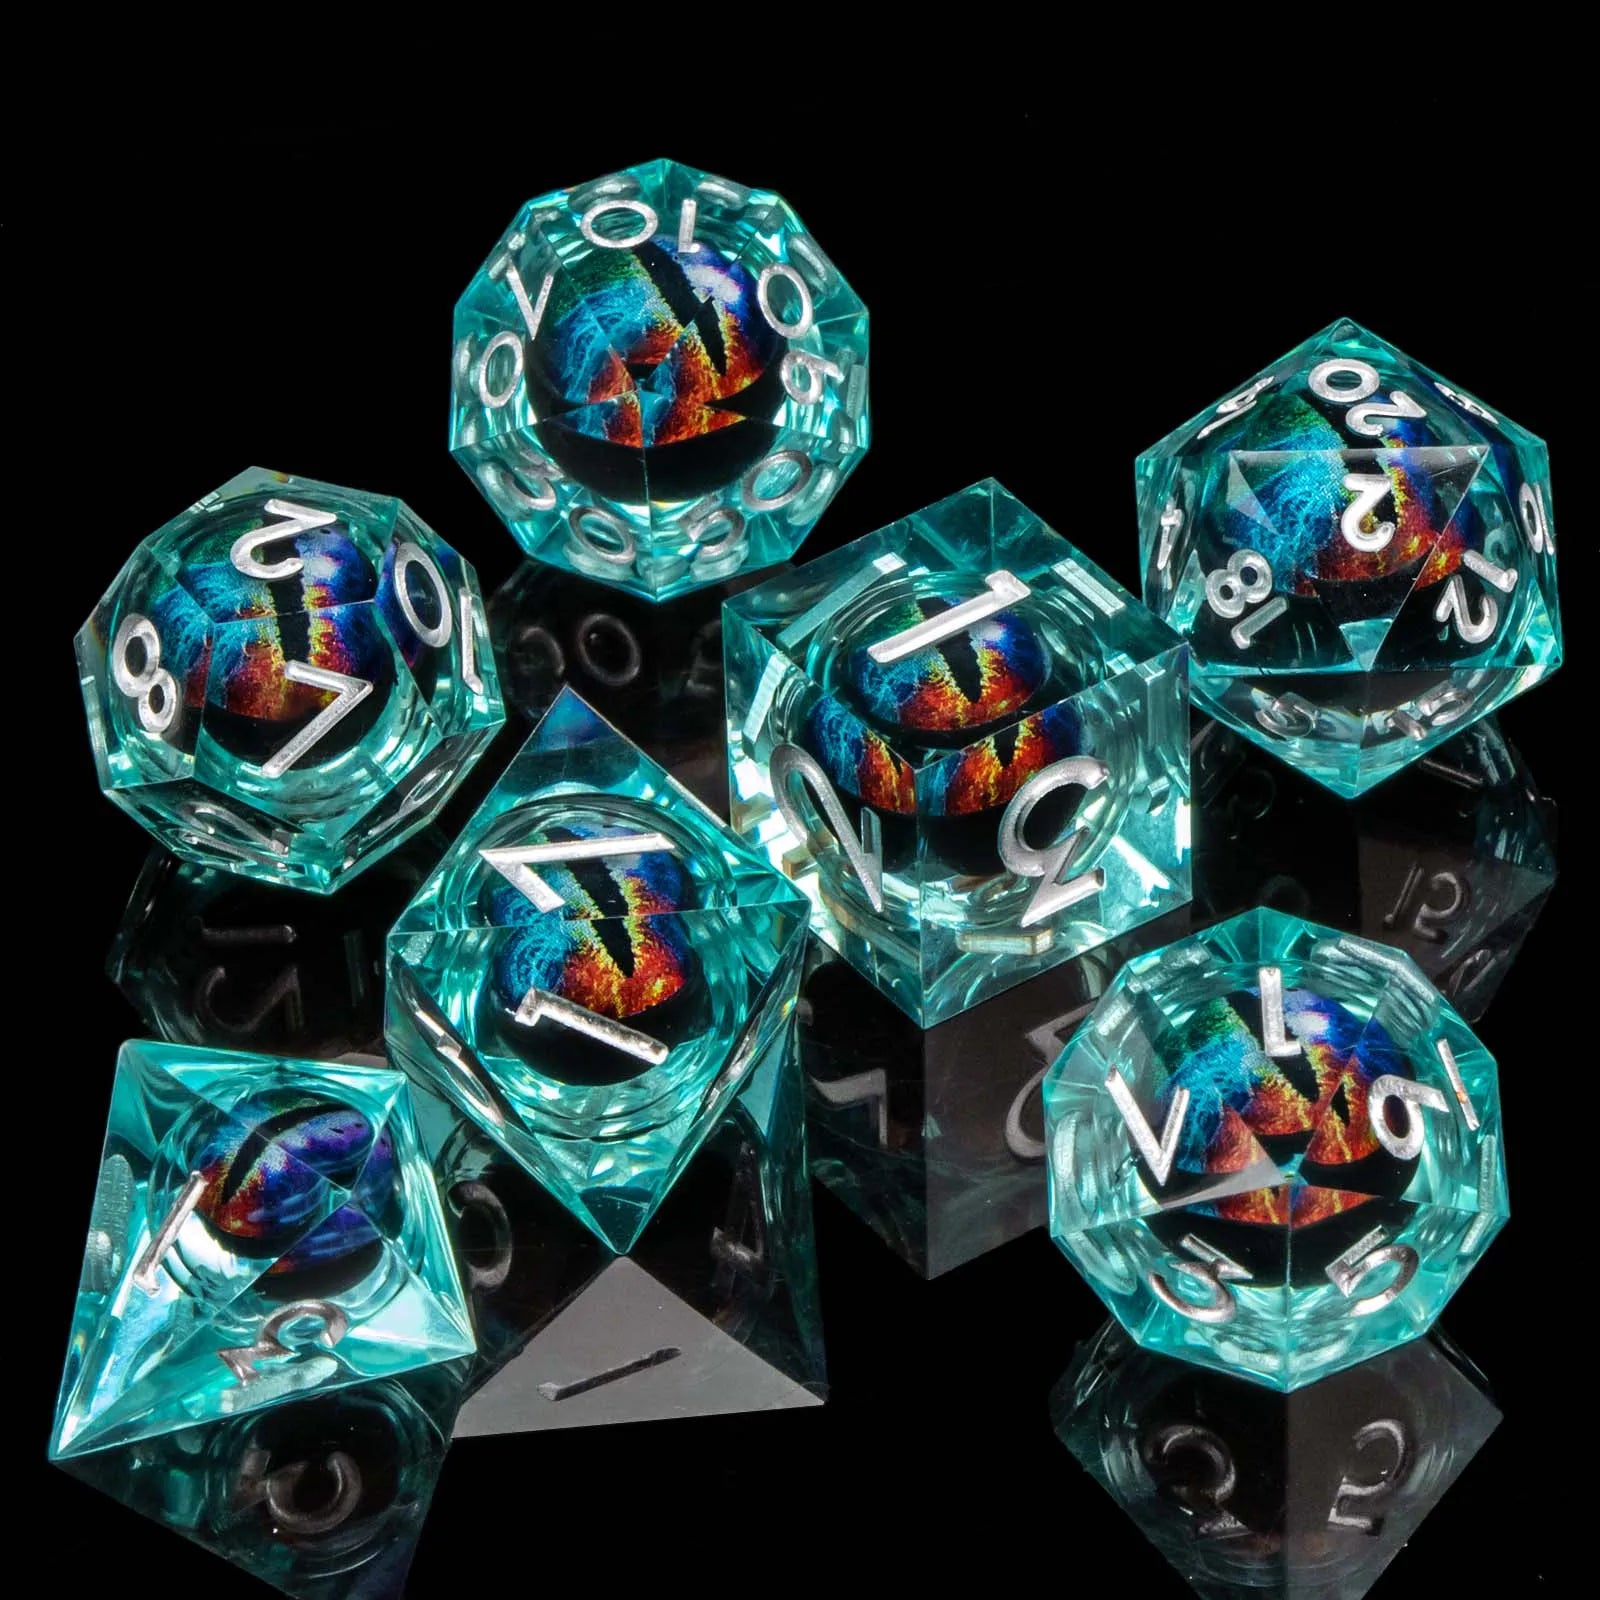 DND Eye Liquid Flow Core Resin D&D Dice Set For D and D Dungeon and Dragon Pathfinder Table Role Playing Game Polyhedral Dice AZ12